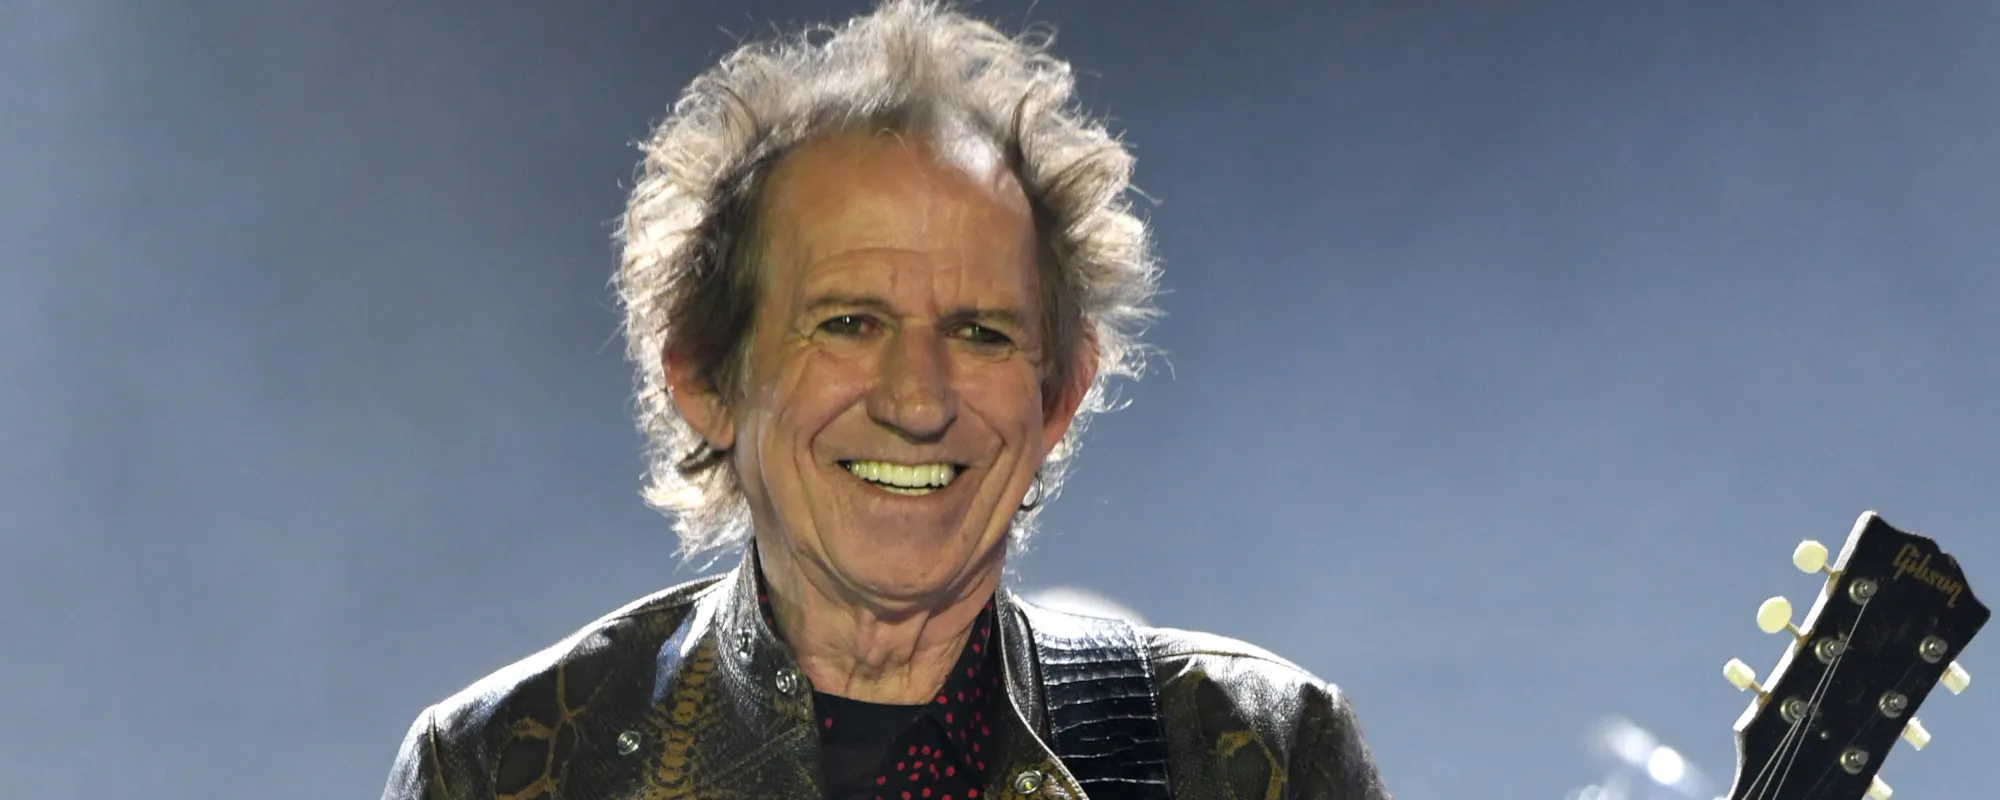 Keith Richards Responds to Eric Clapton’s  Vaccine Skepticism: “Do As Doctor Says”